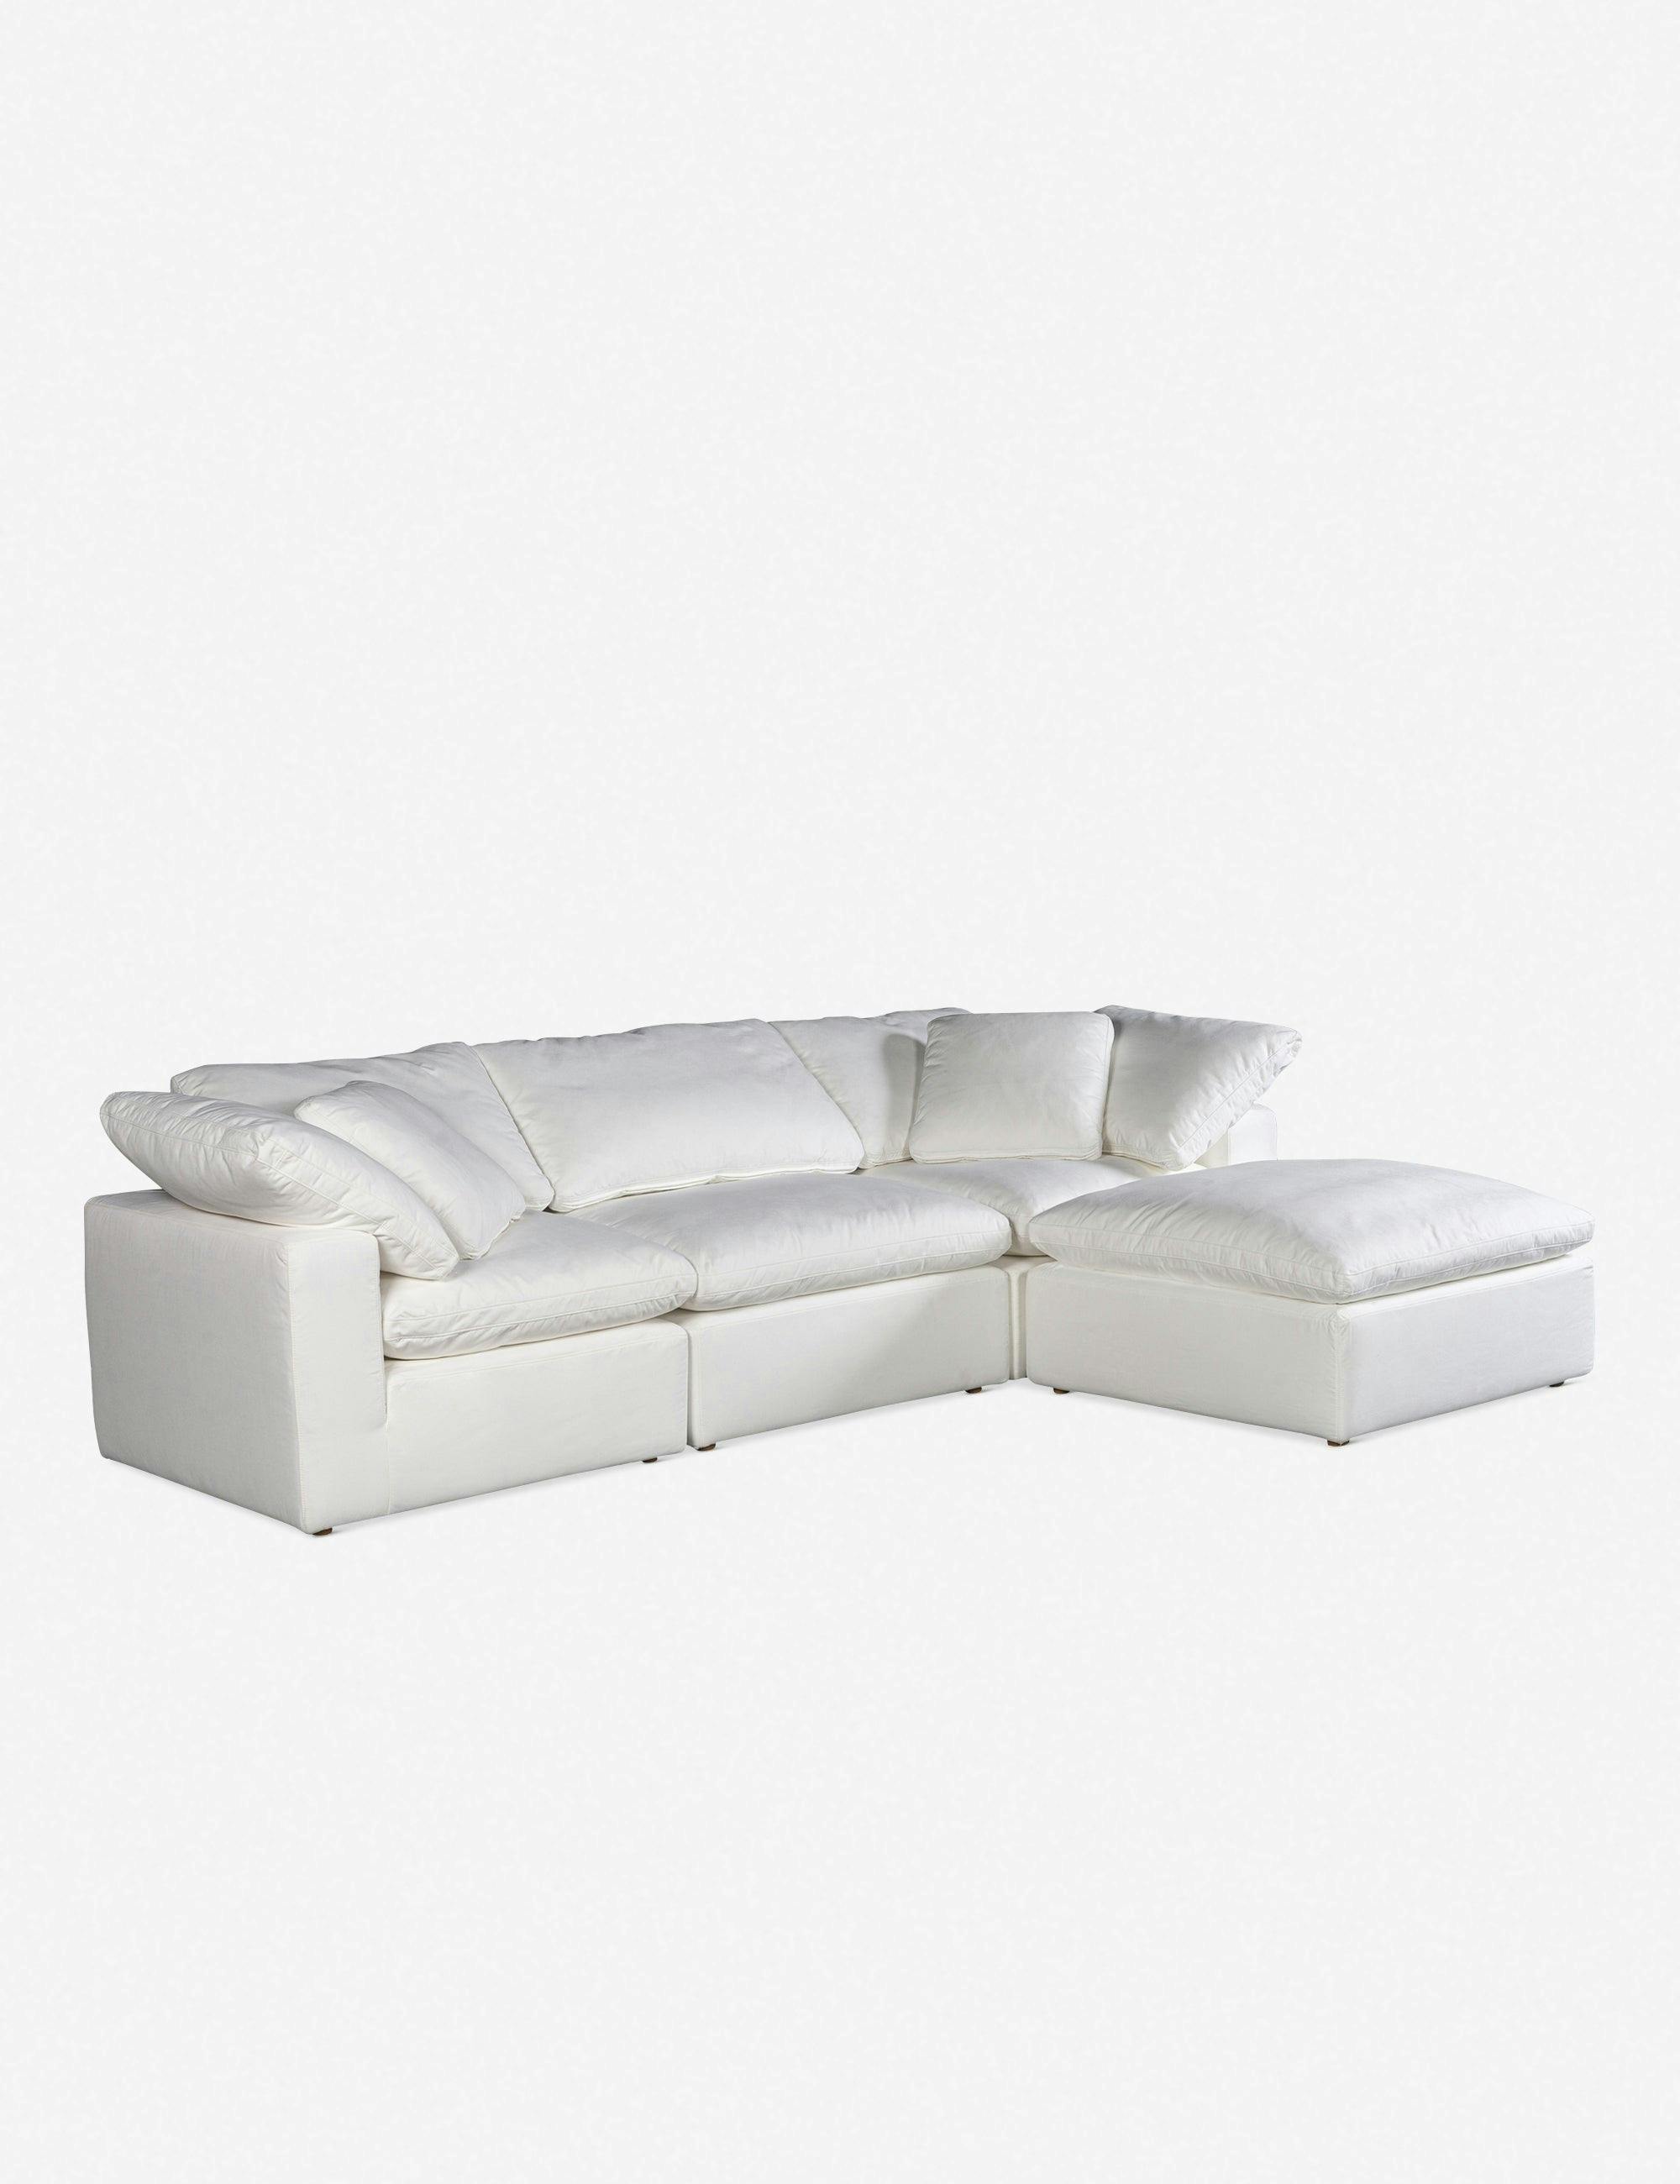 Jacques Large Sectional Sofa - Cream